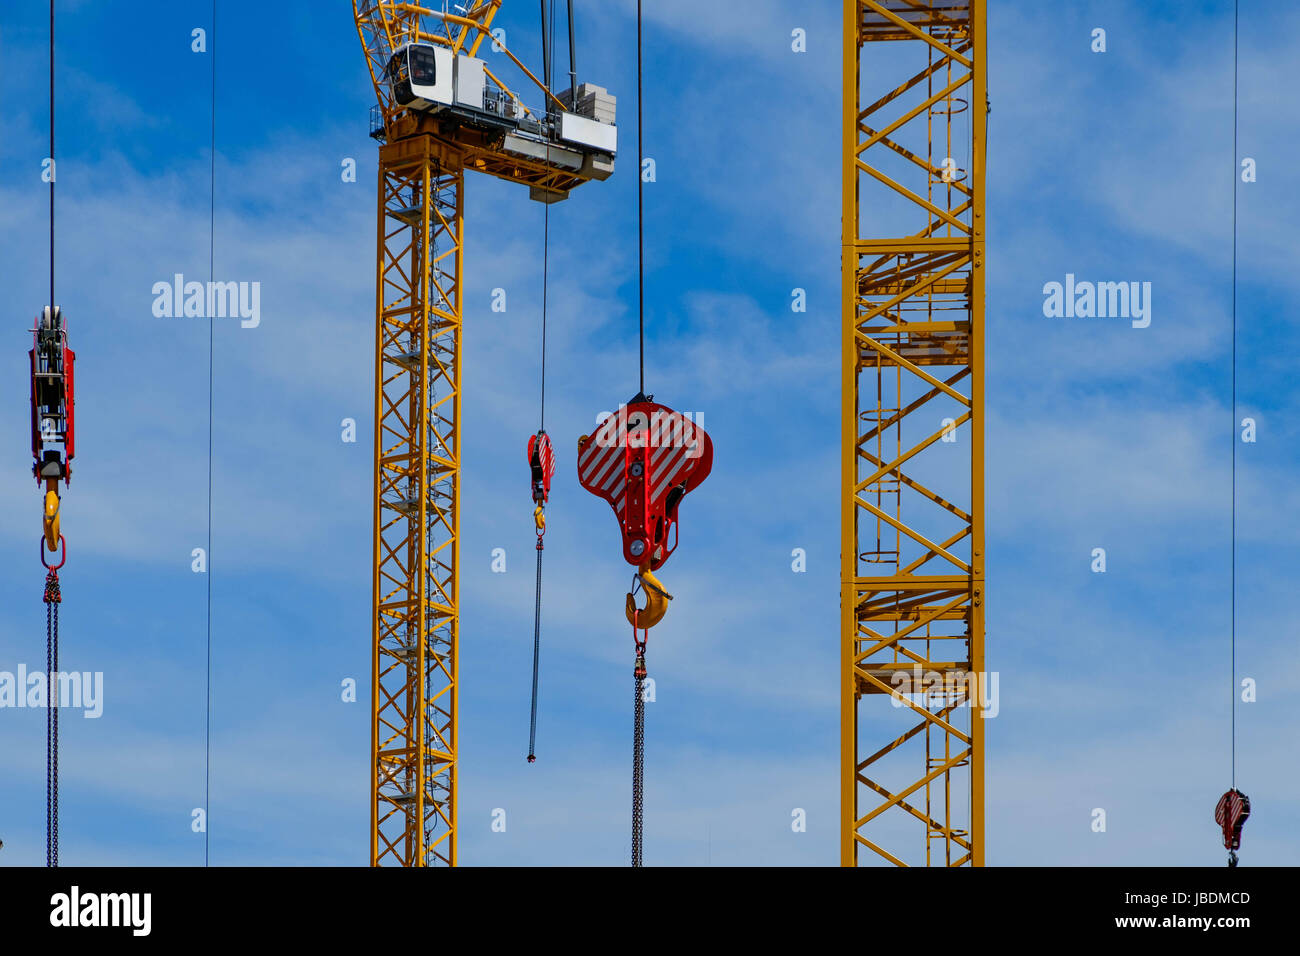 many yellow construction cranes on blue sky backgrounds Stock Photo